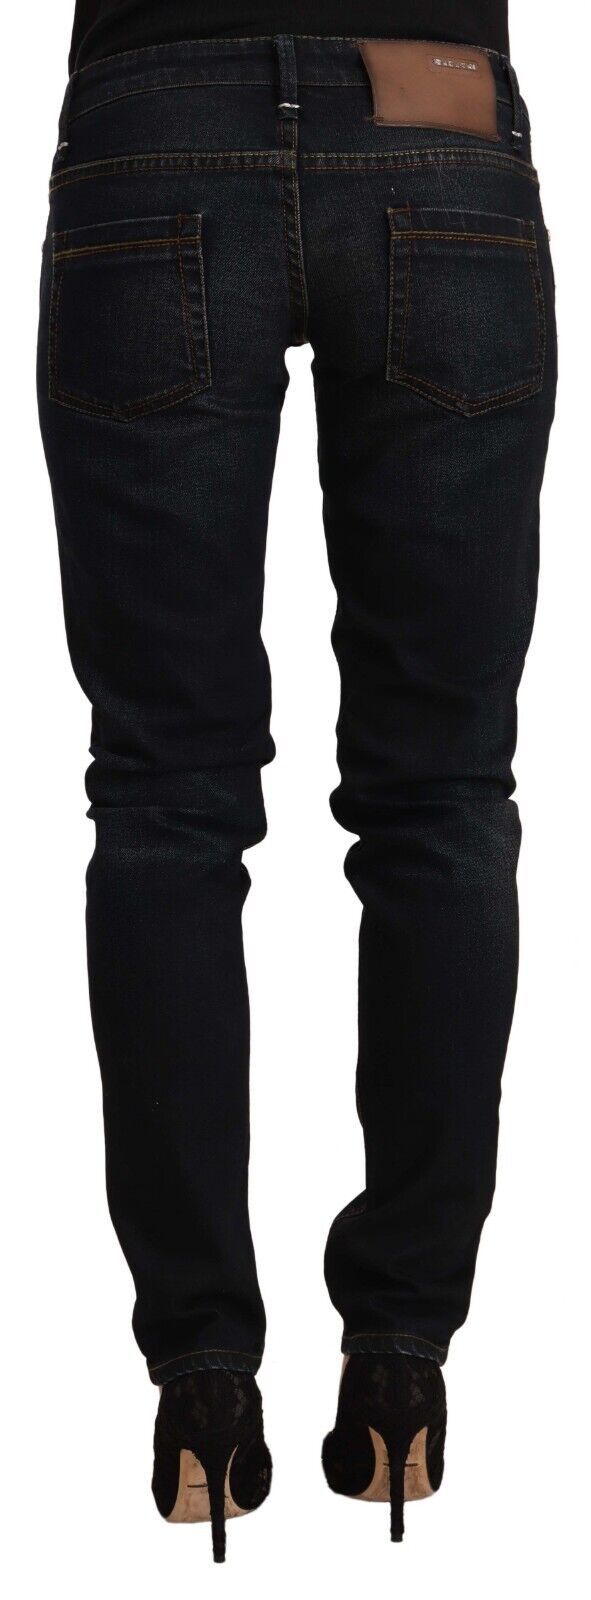 Acht Chic Black Washed Skinny Jeans for Her